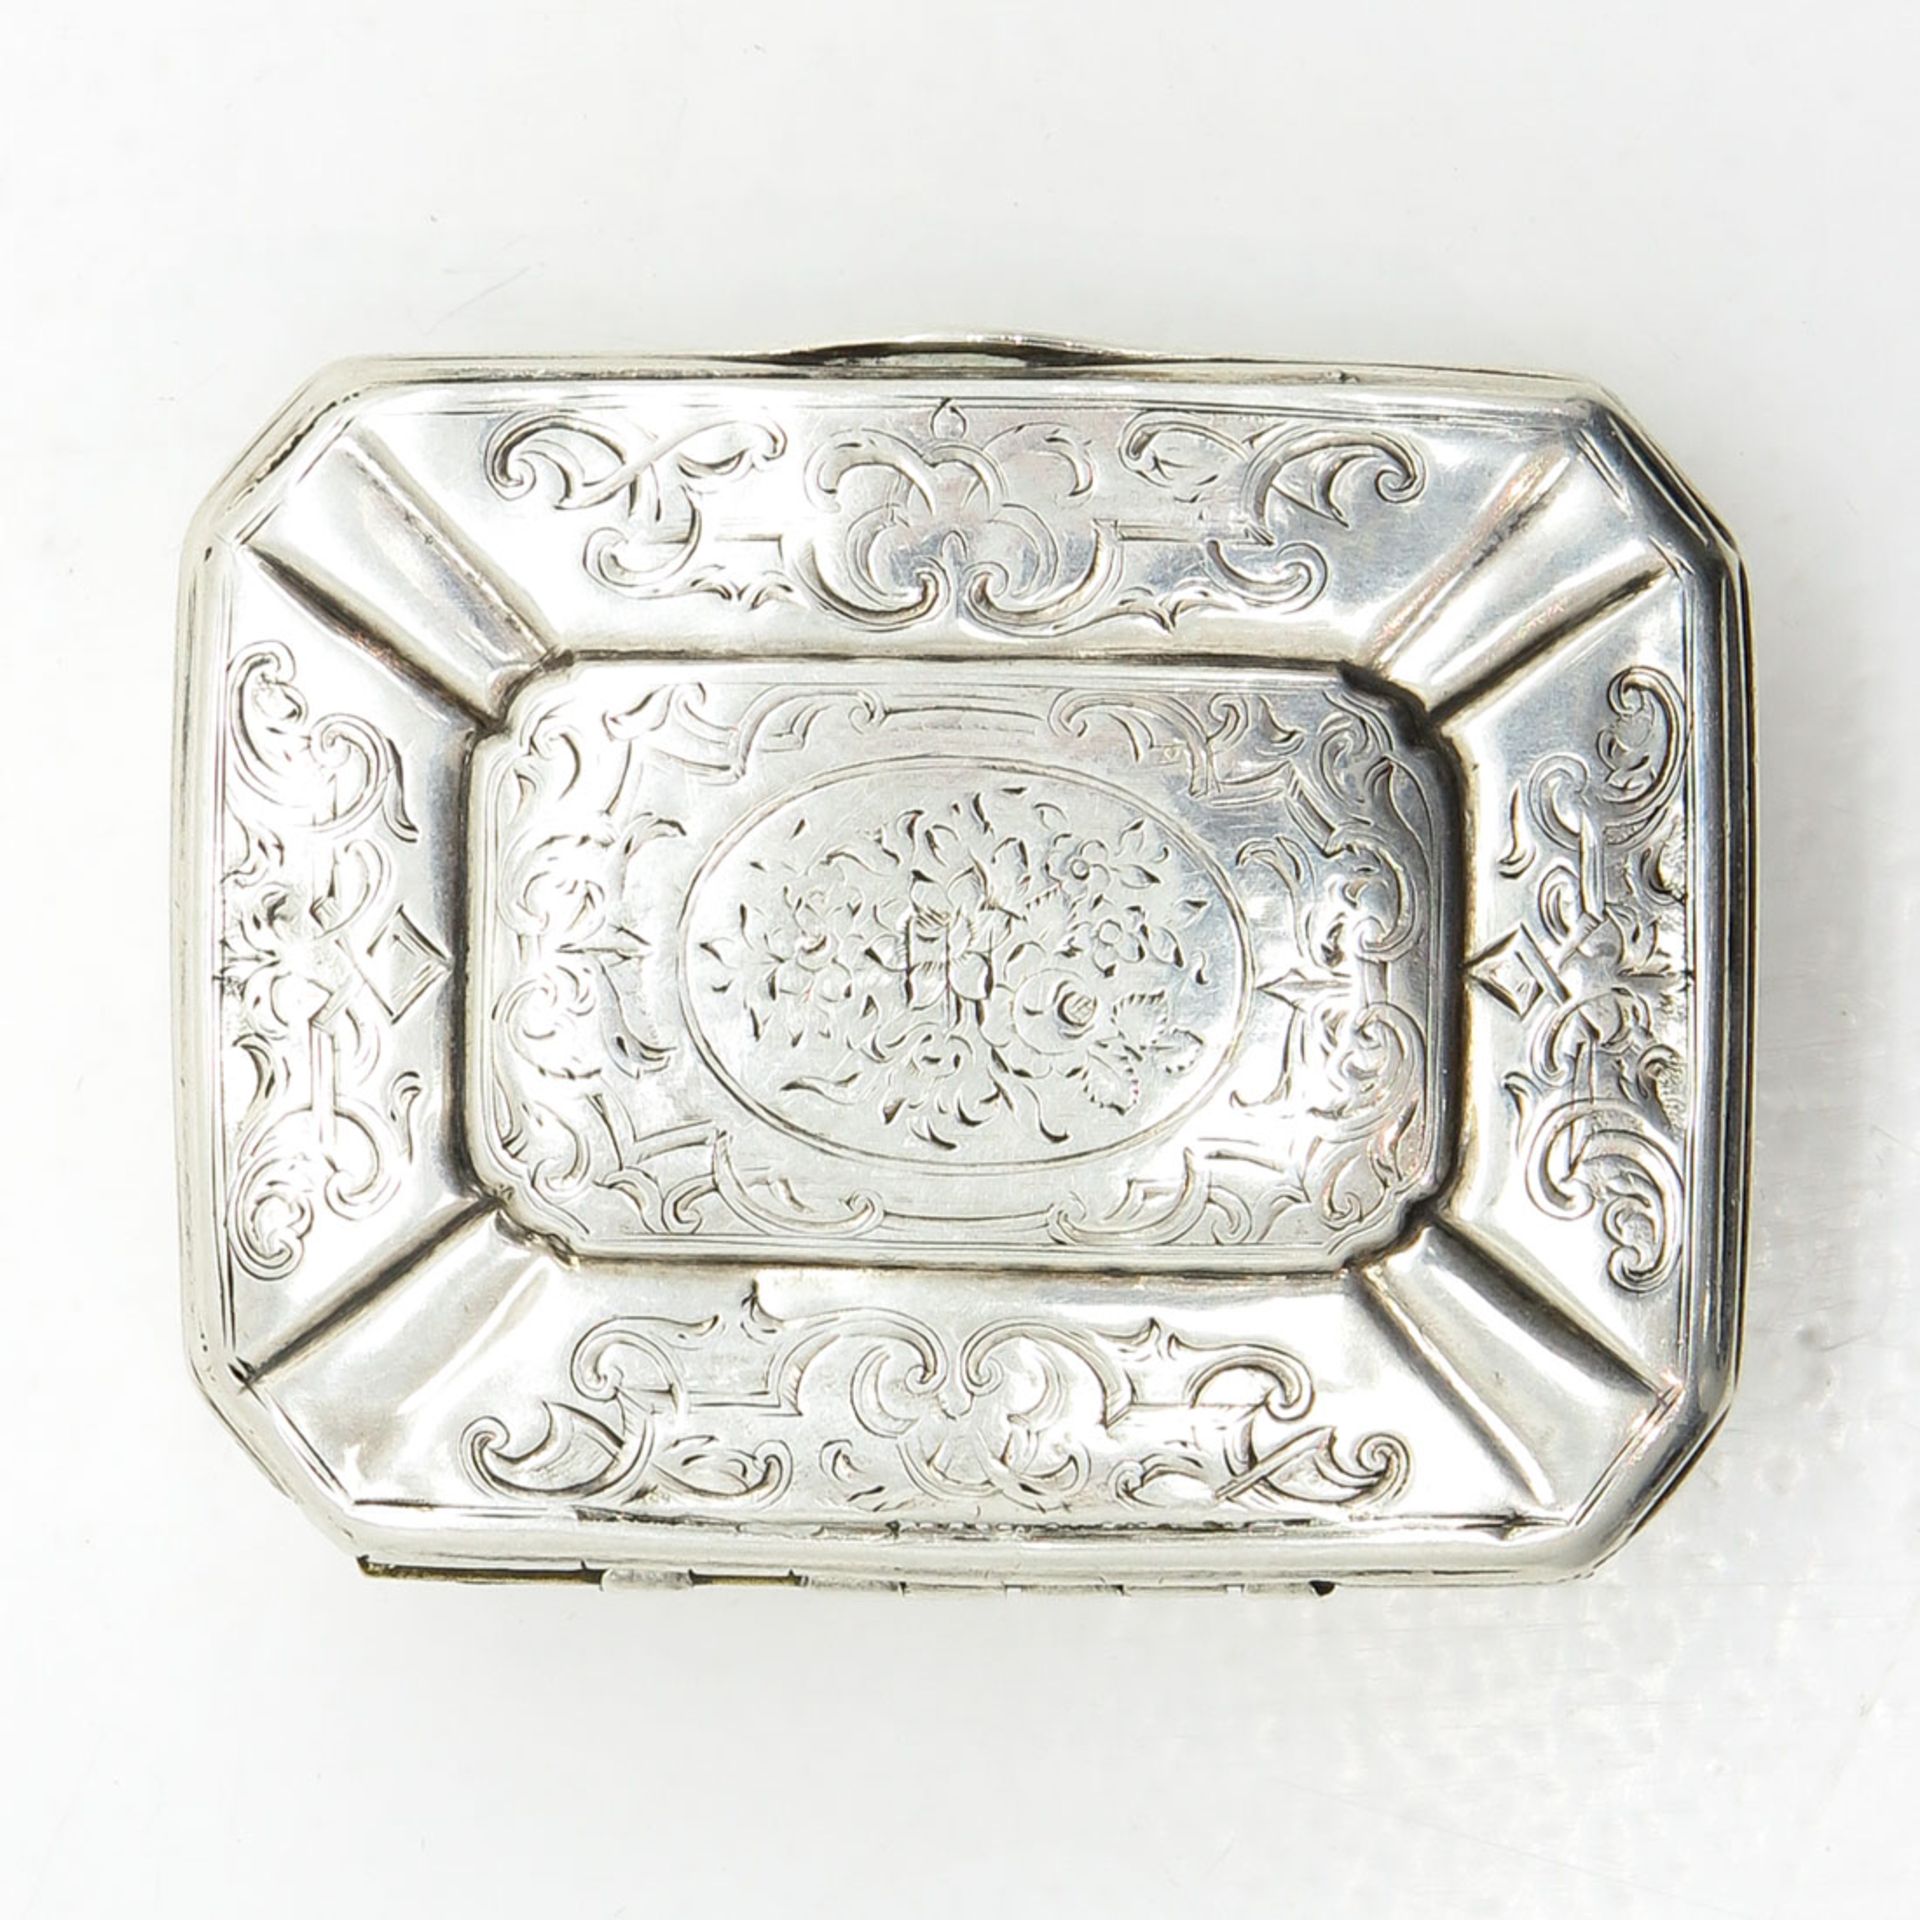 Engraved Silver Snuff Box Dated 1737